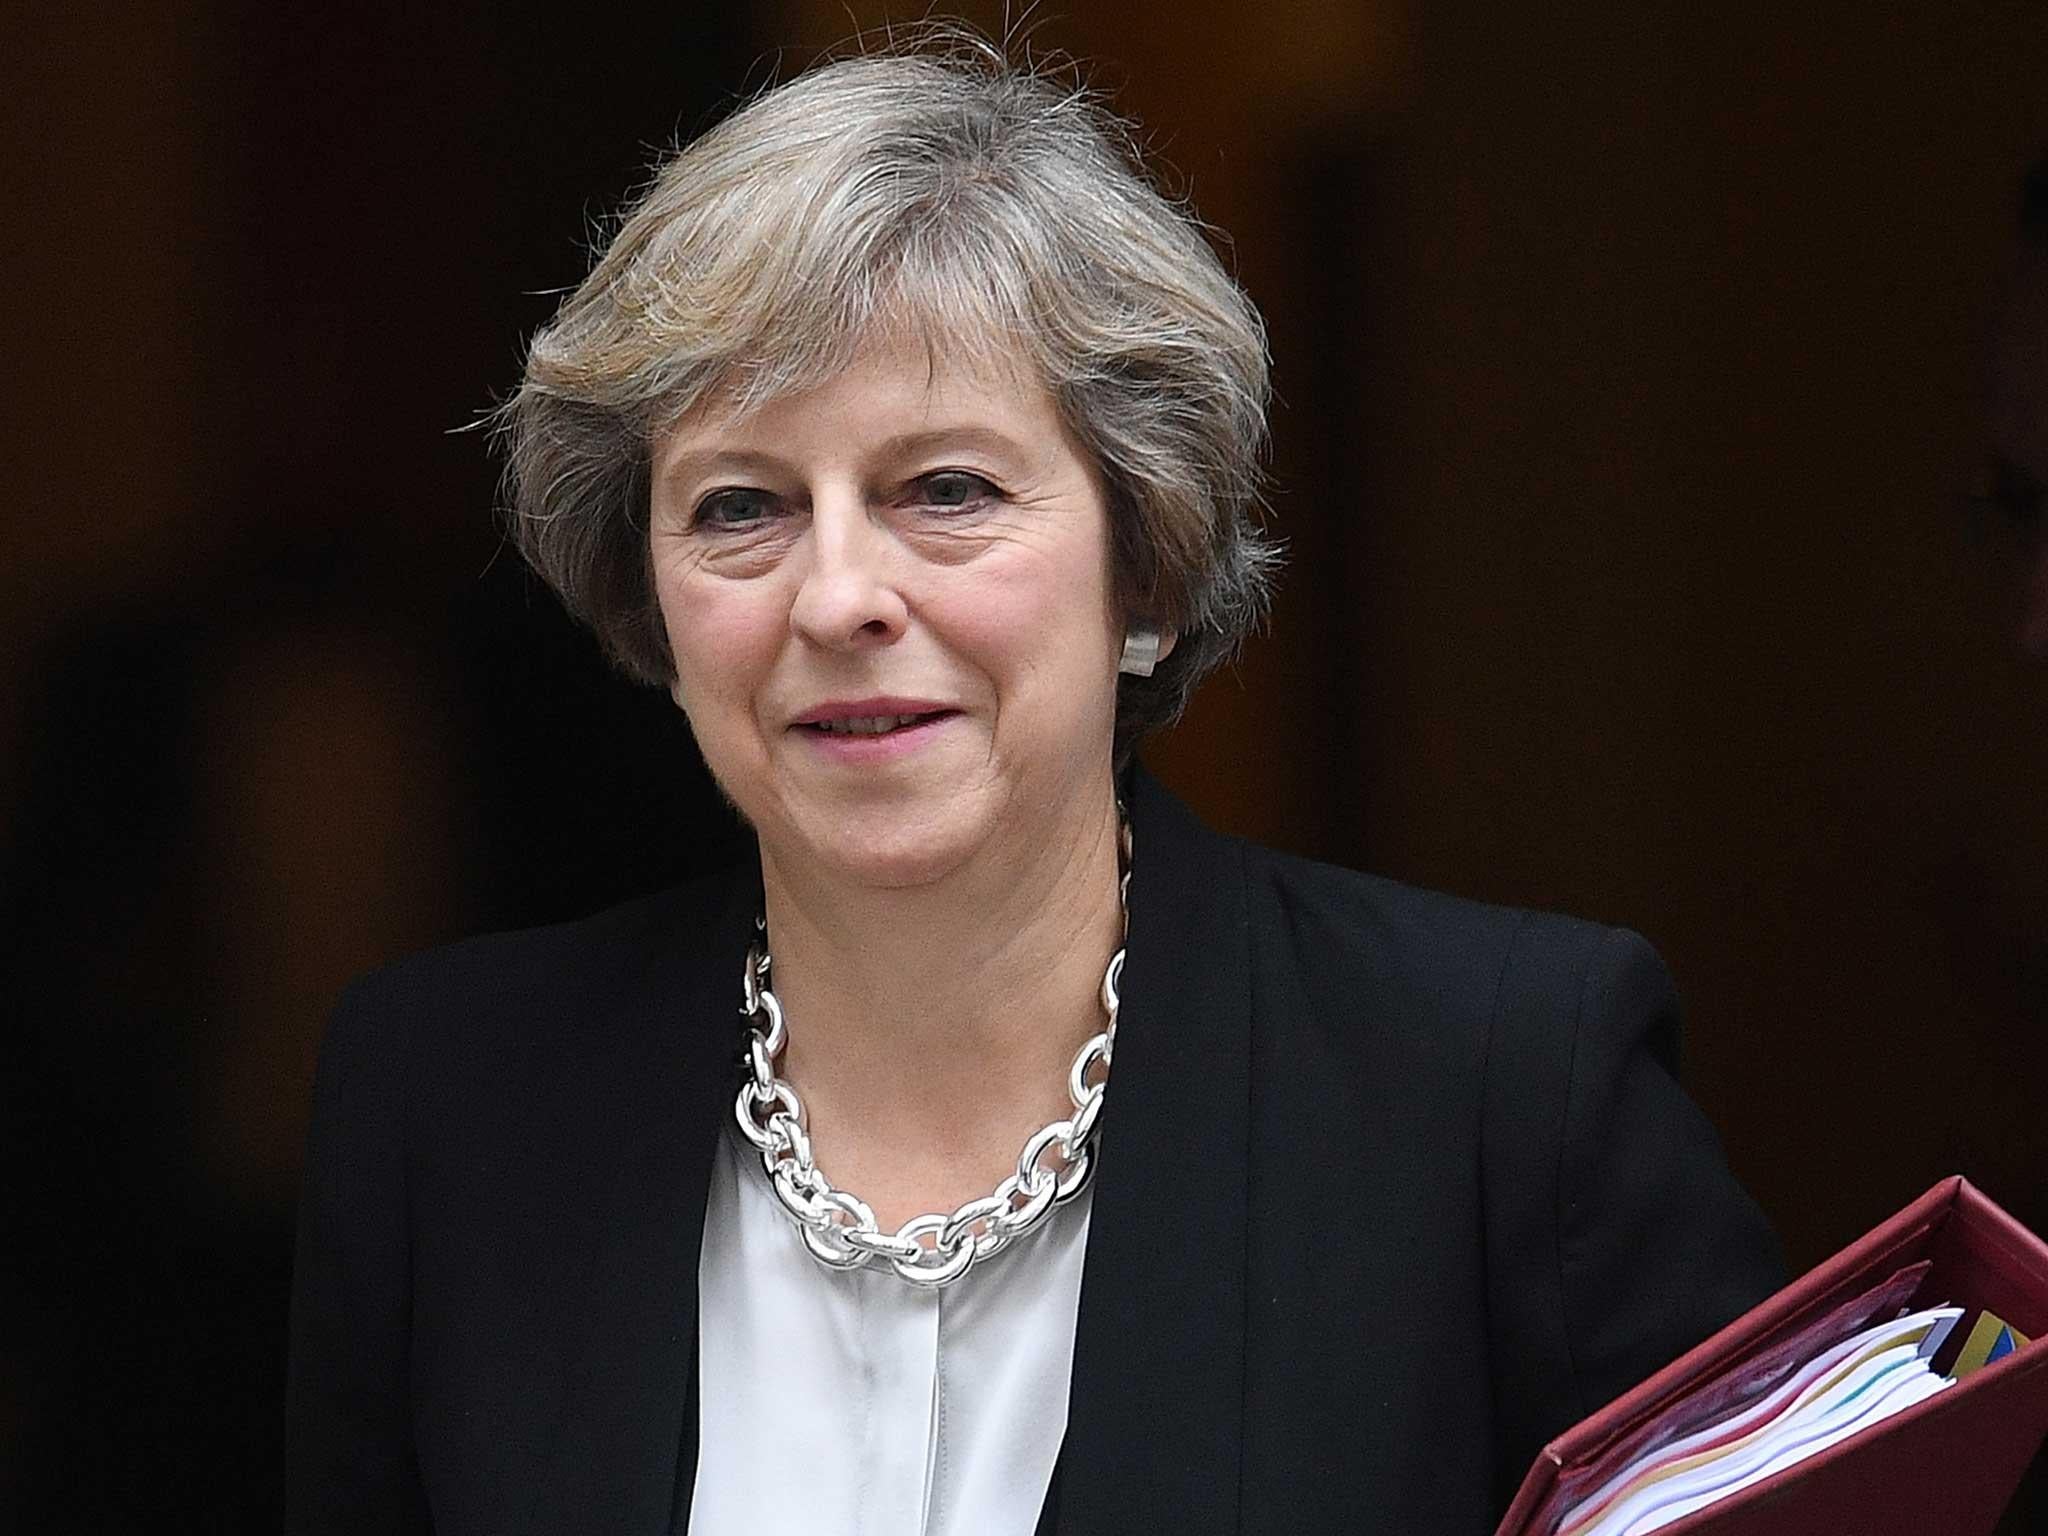 British Prime Minister Theresa May is heading to the UN in New York